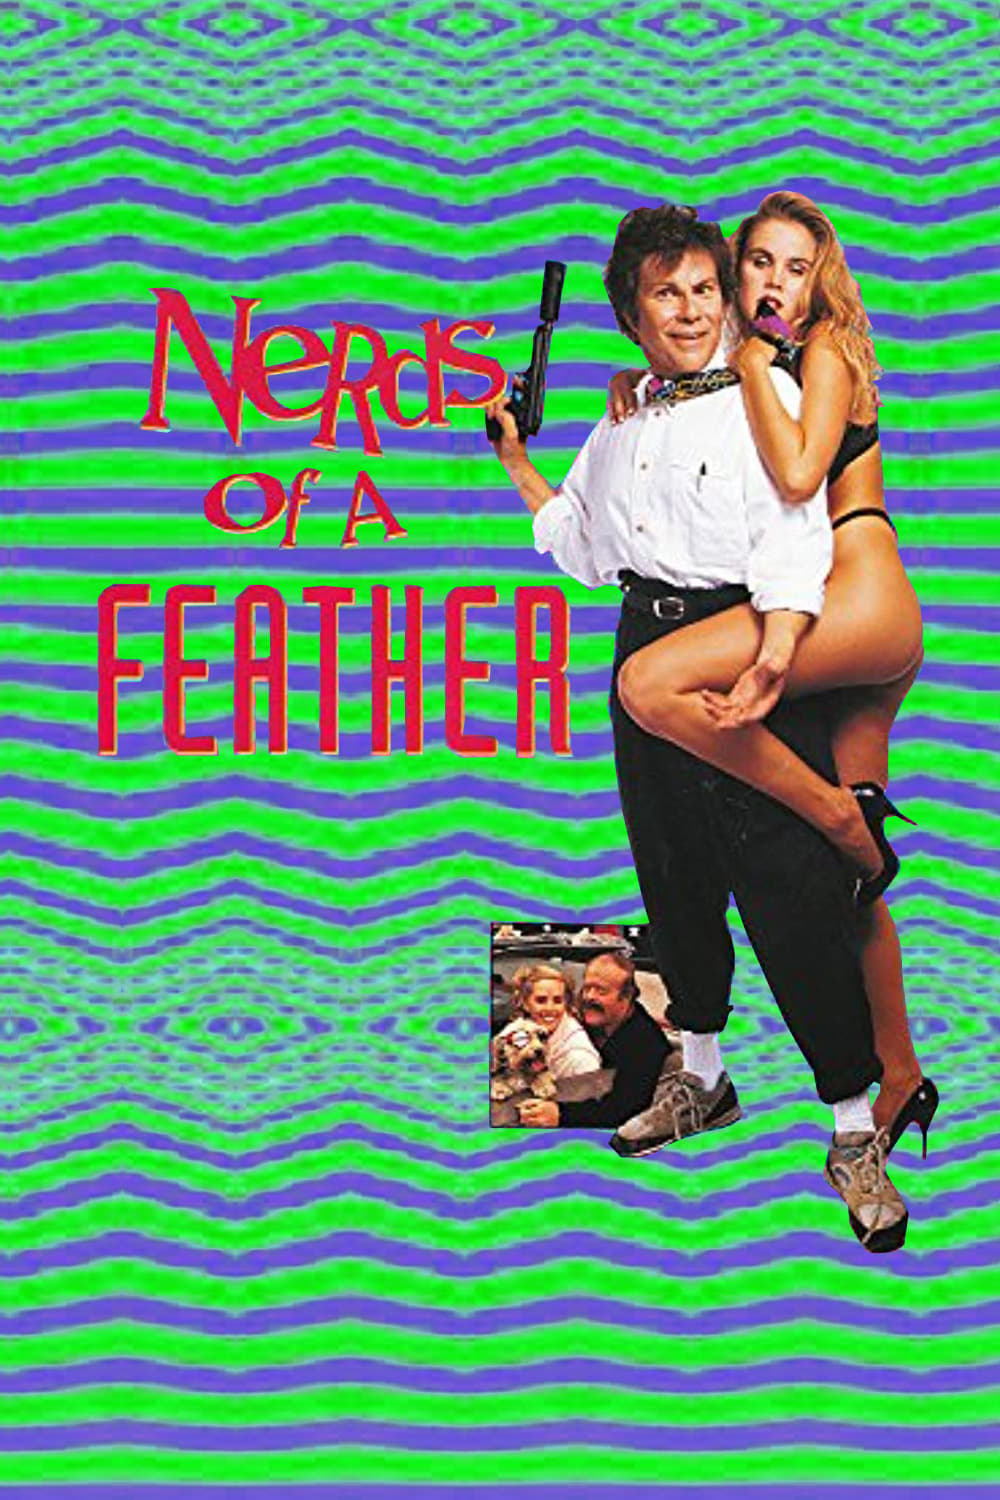 Nerds of a Feather (1989)